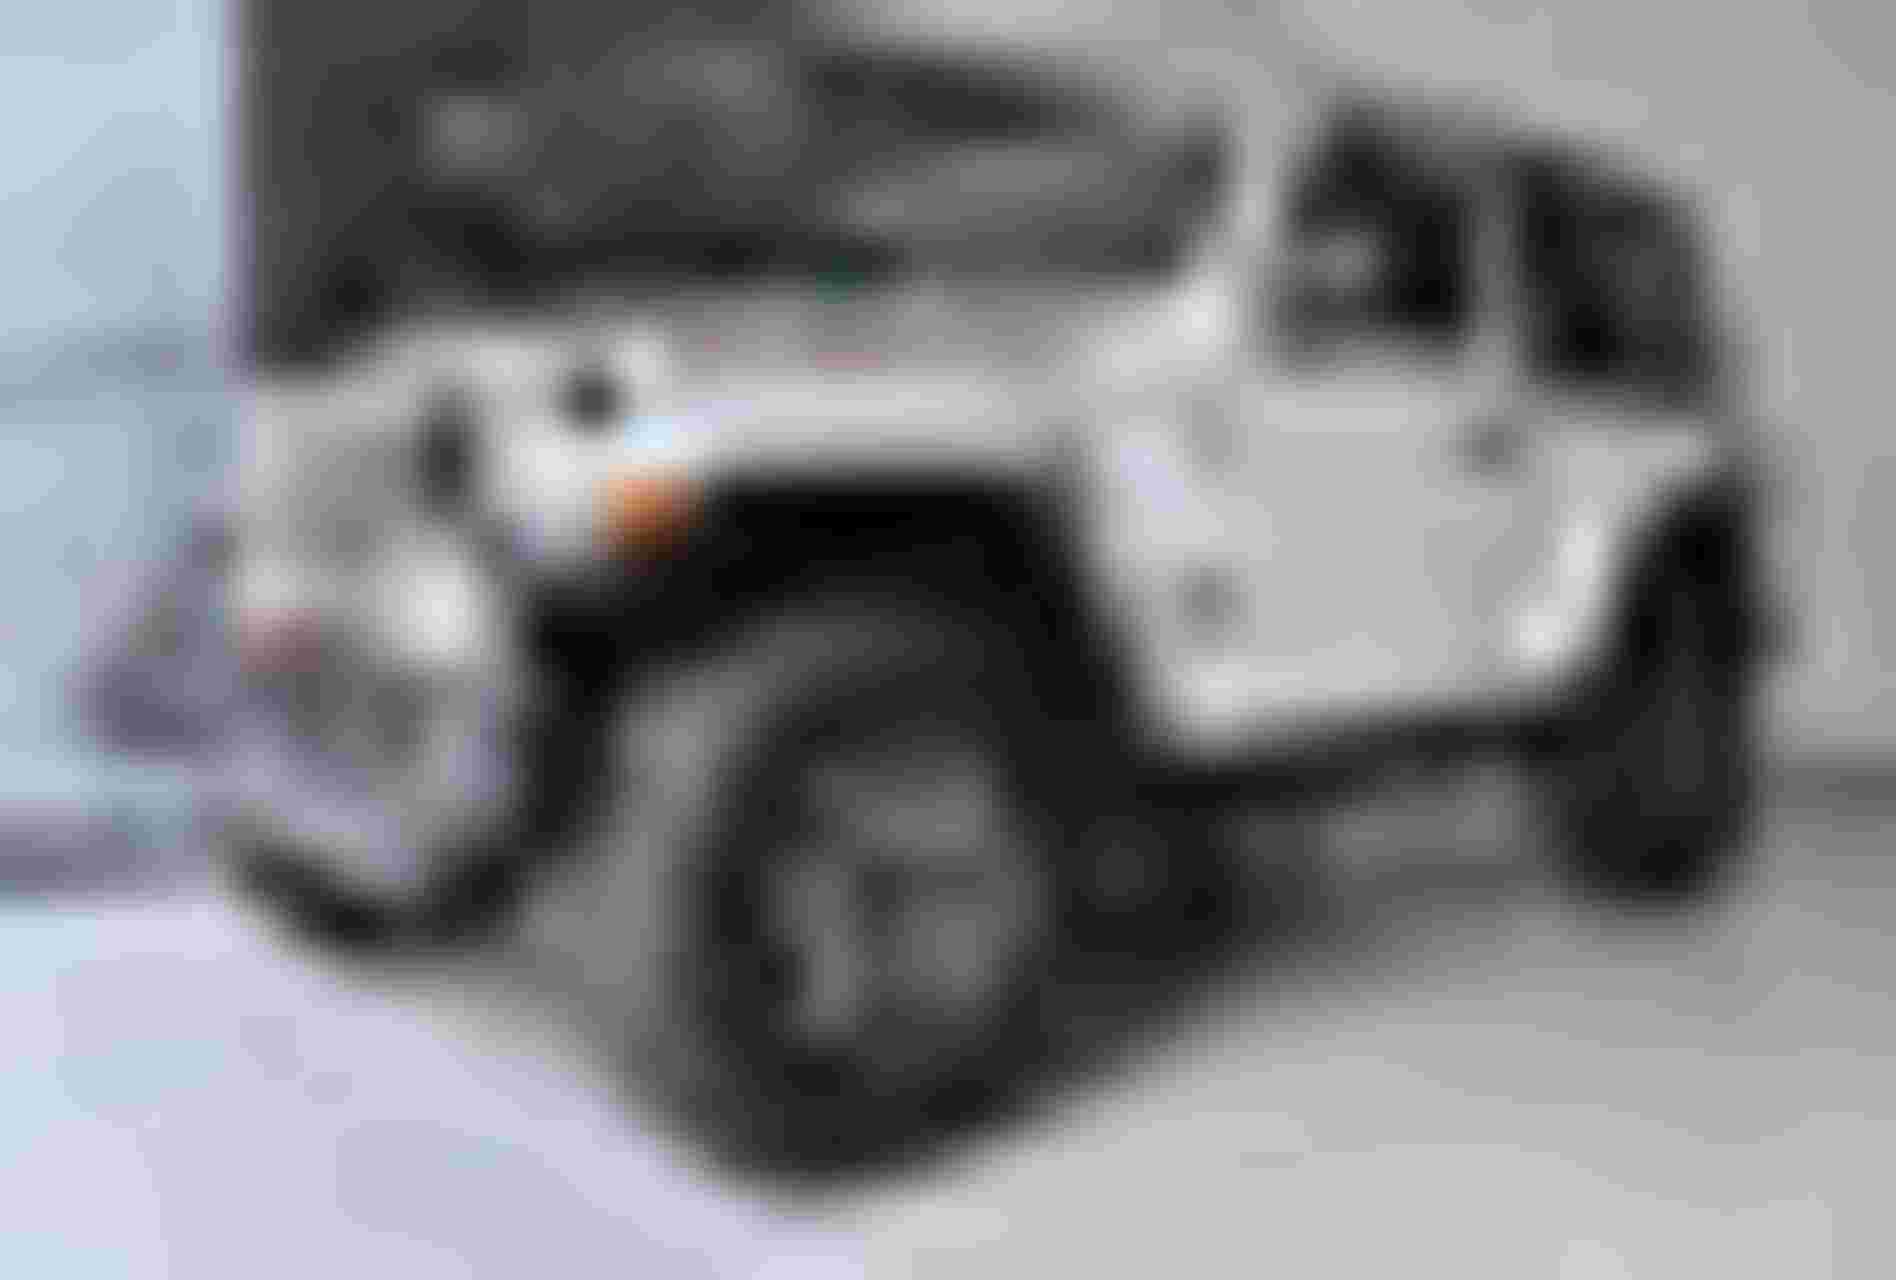 suv off-road 4 ty dong, chon land rover defender hay jeep wrangler?